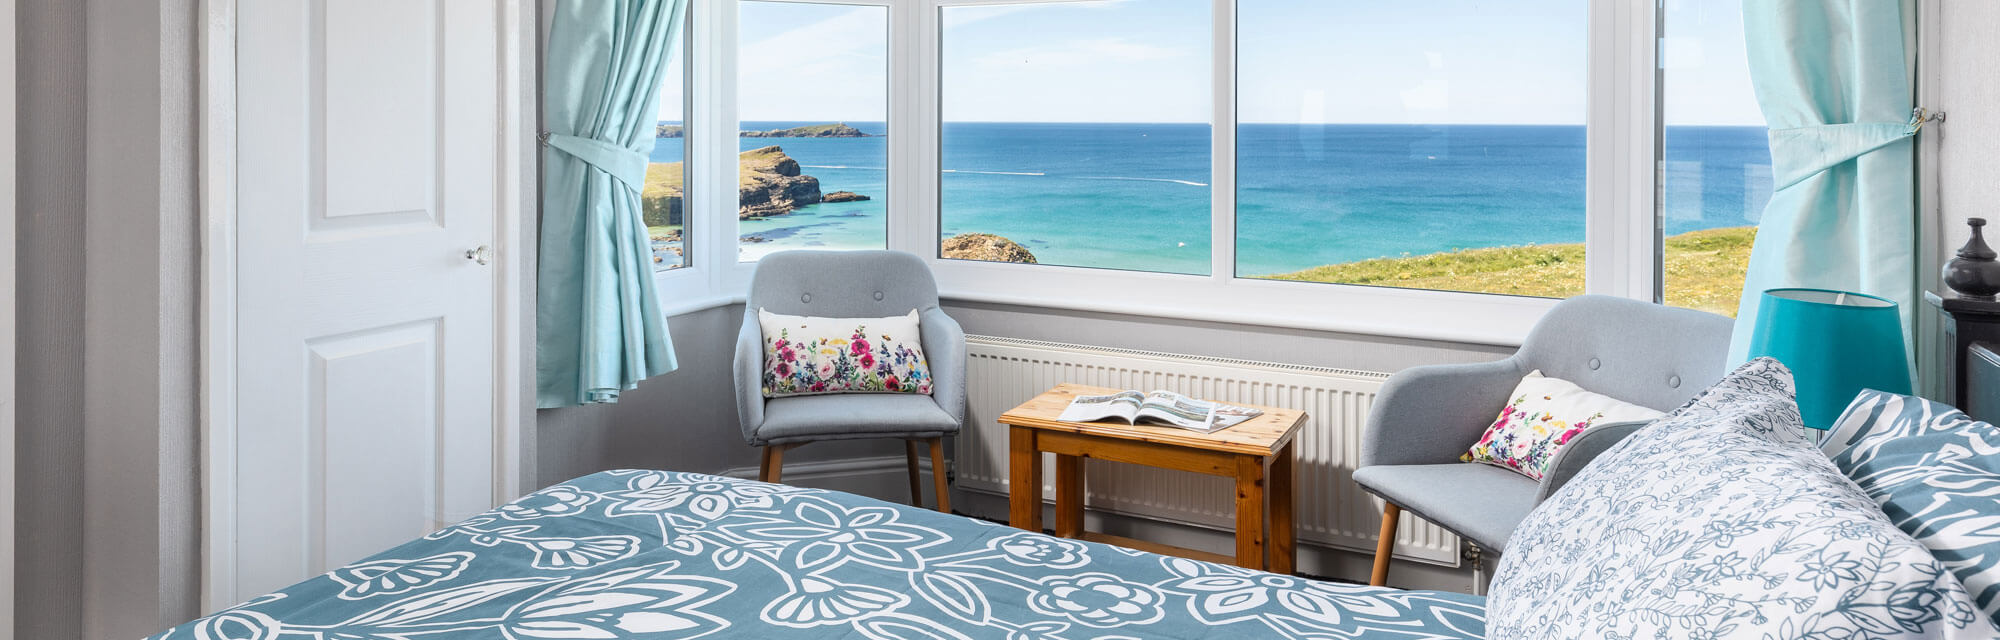 Hotel room interior with sea view